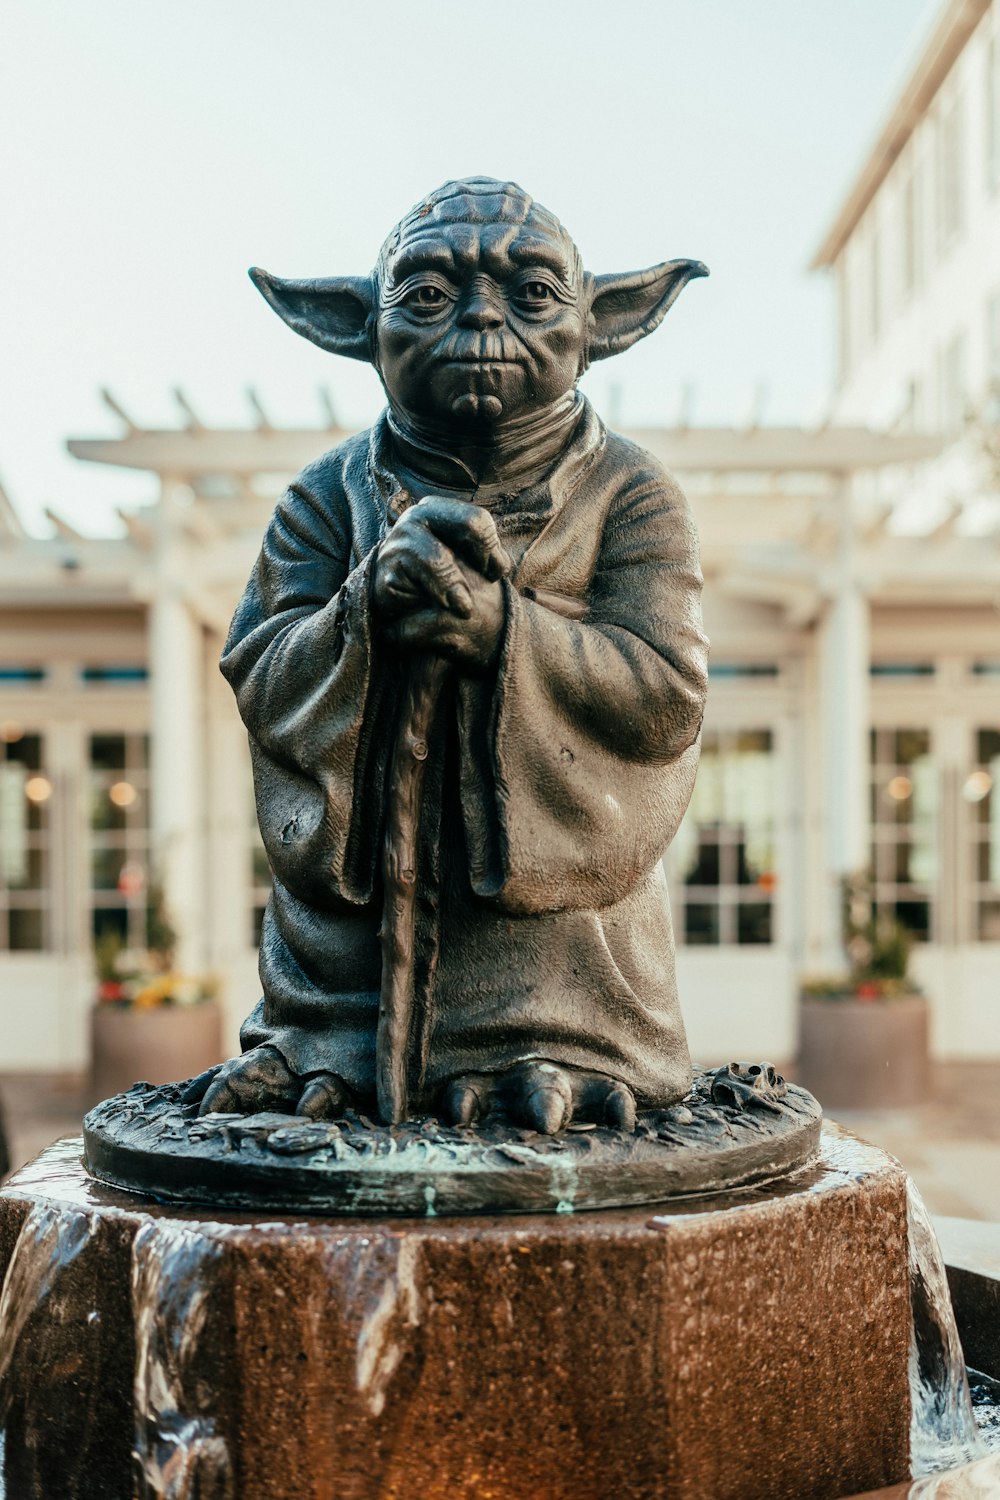 a statue of yoda holding a staff in front of a building